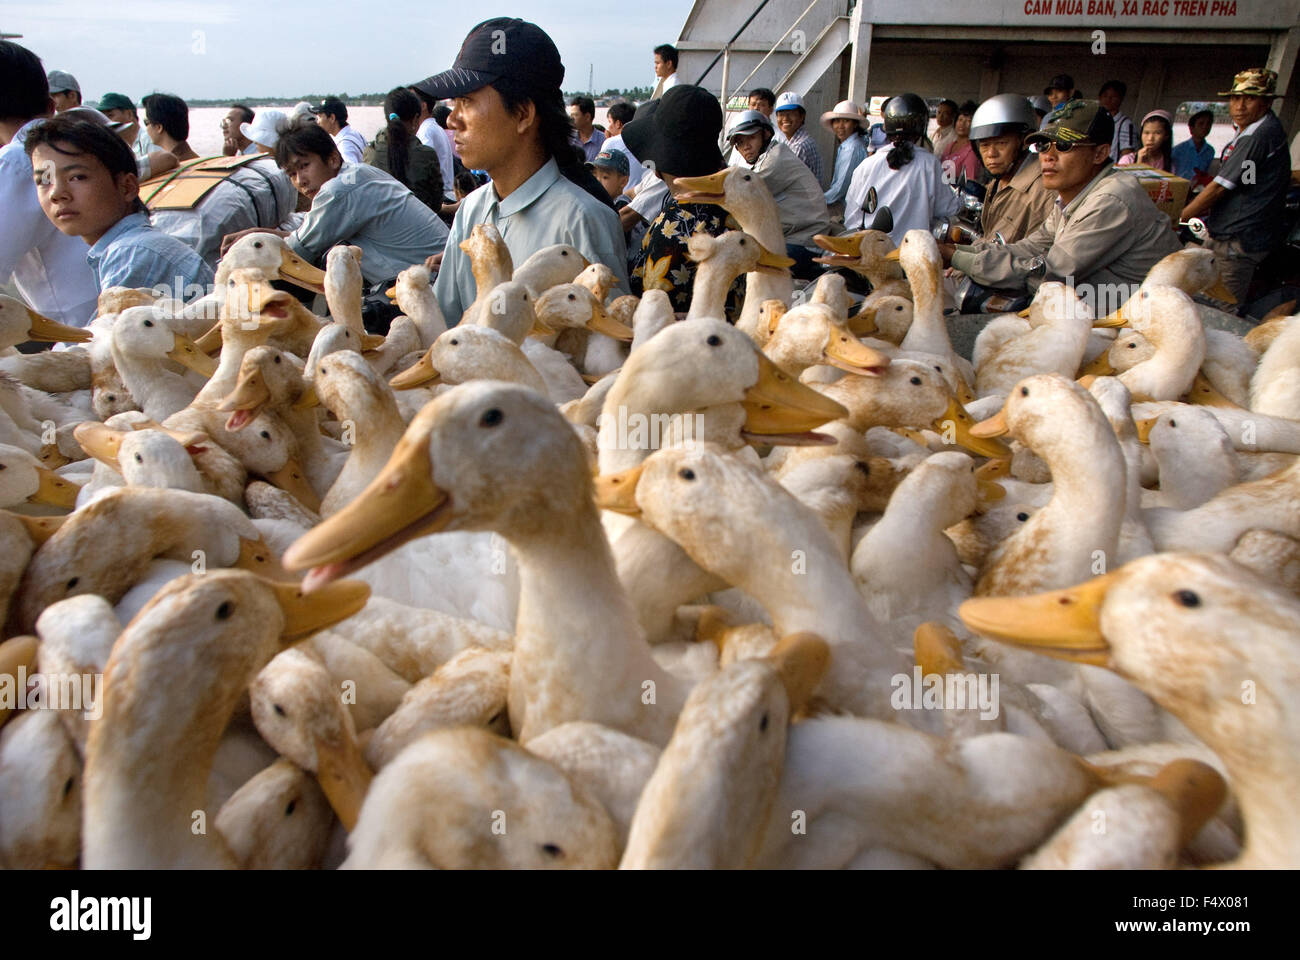 A lot of ducks on the public ferry to cross the Long Vinh Co Chien River. Mekong Delta. Stock Photo